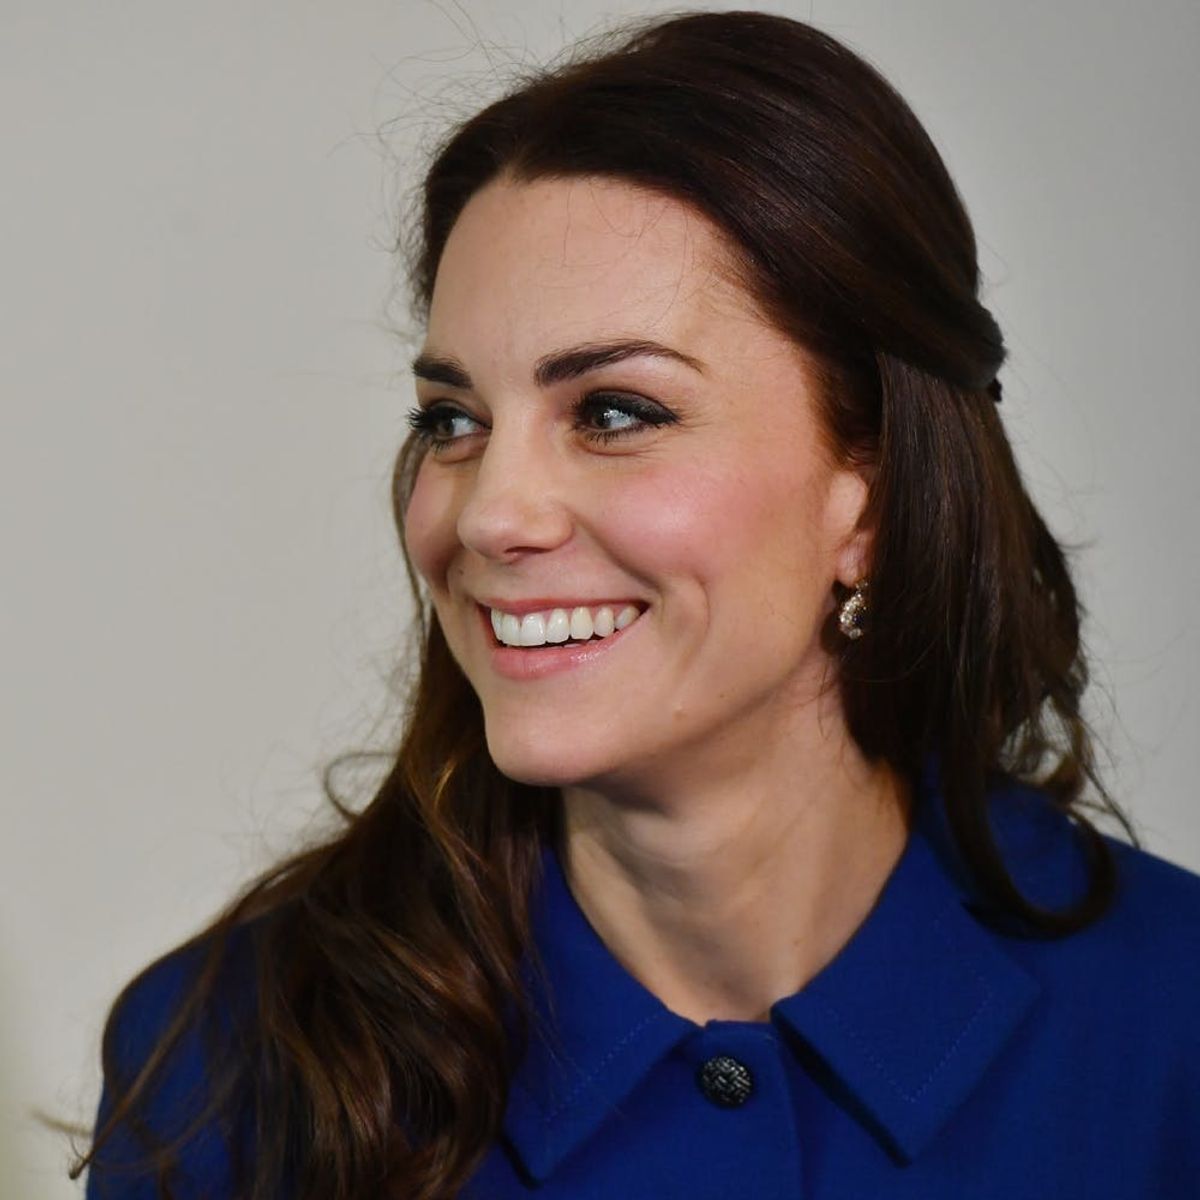 Kate Middleton Wore This ’90s Hair Clip and We’re Confused